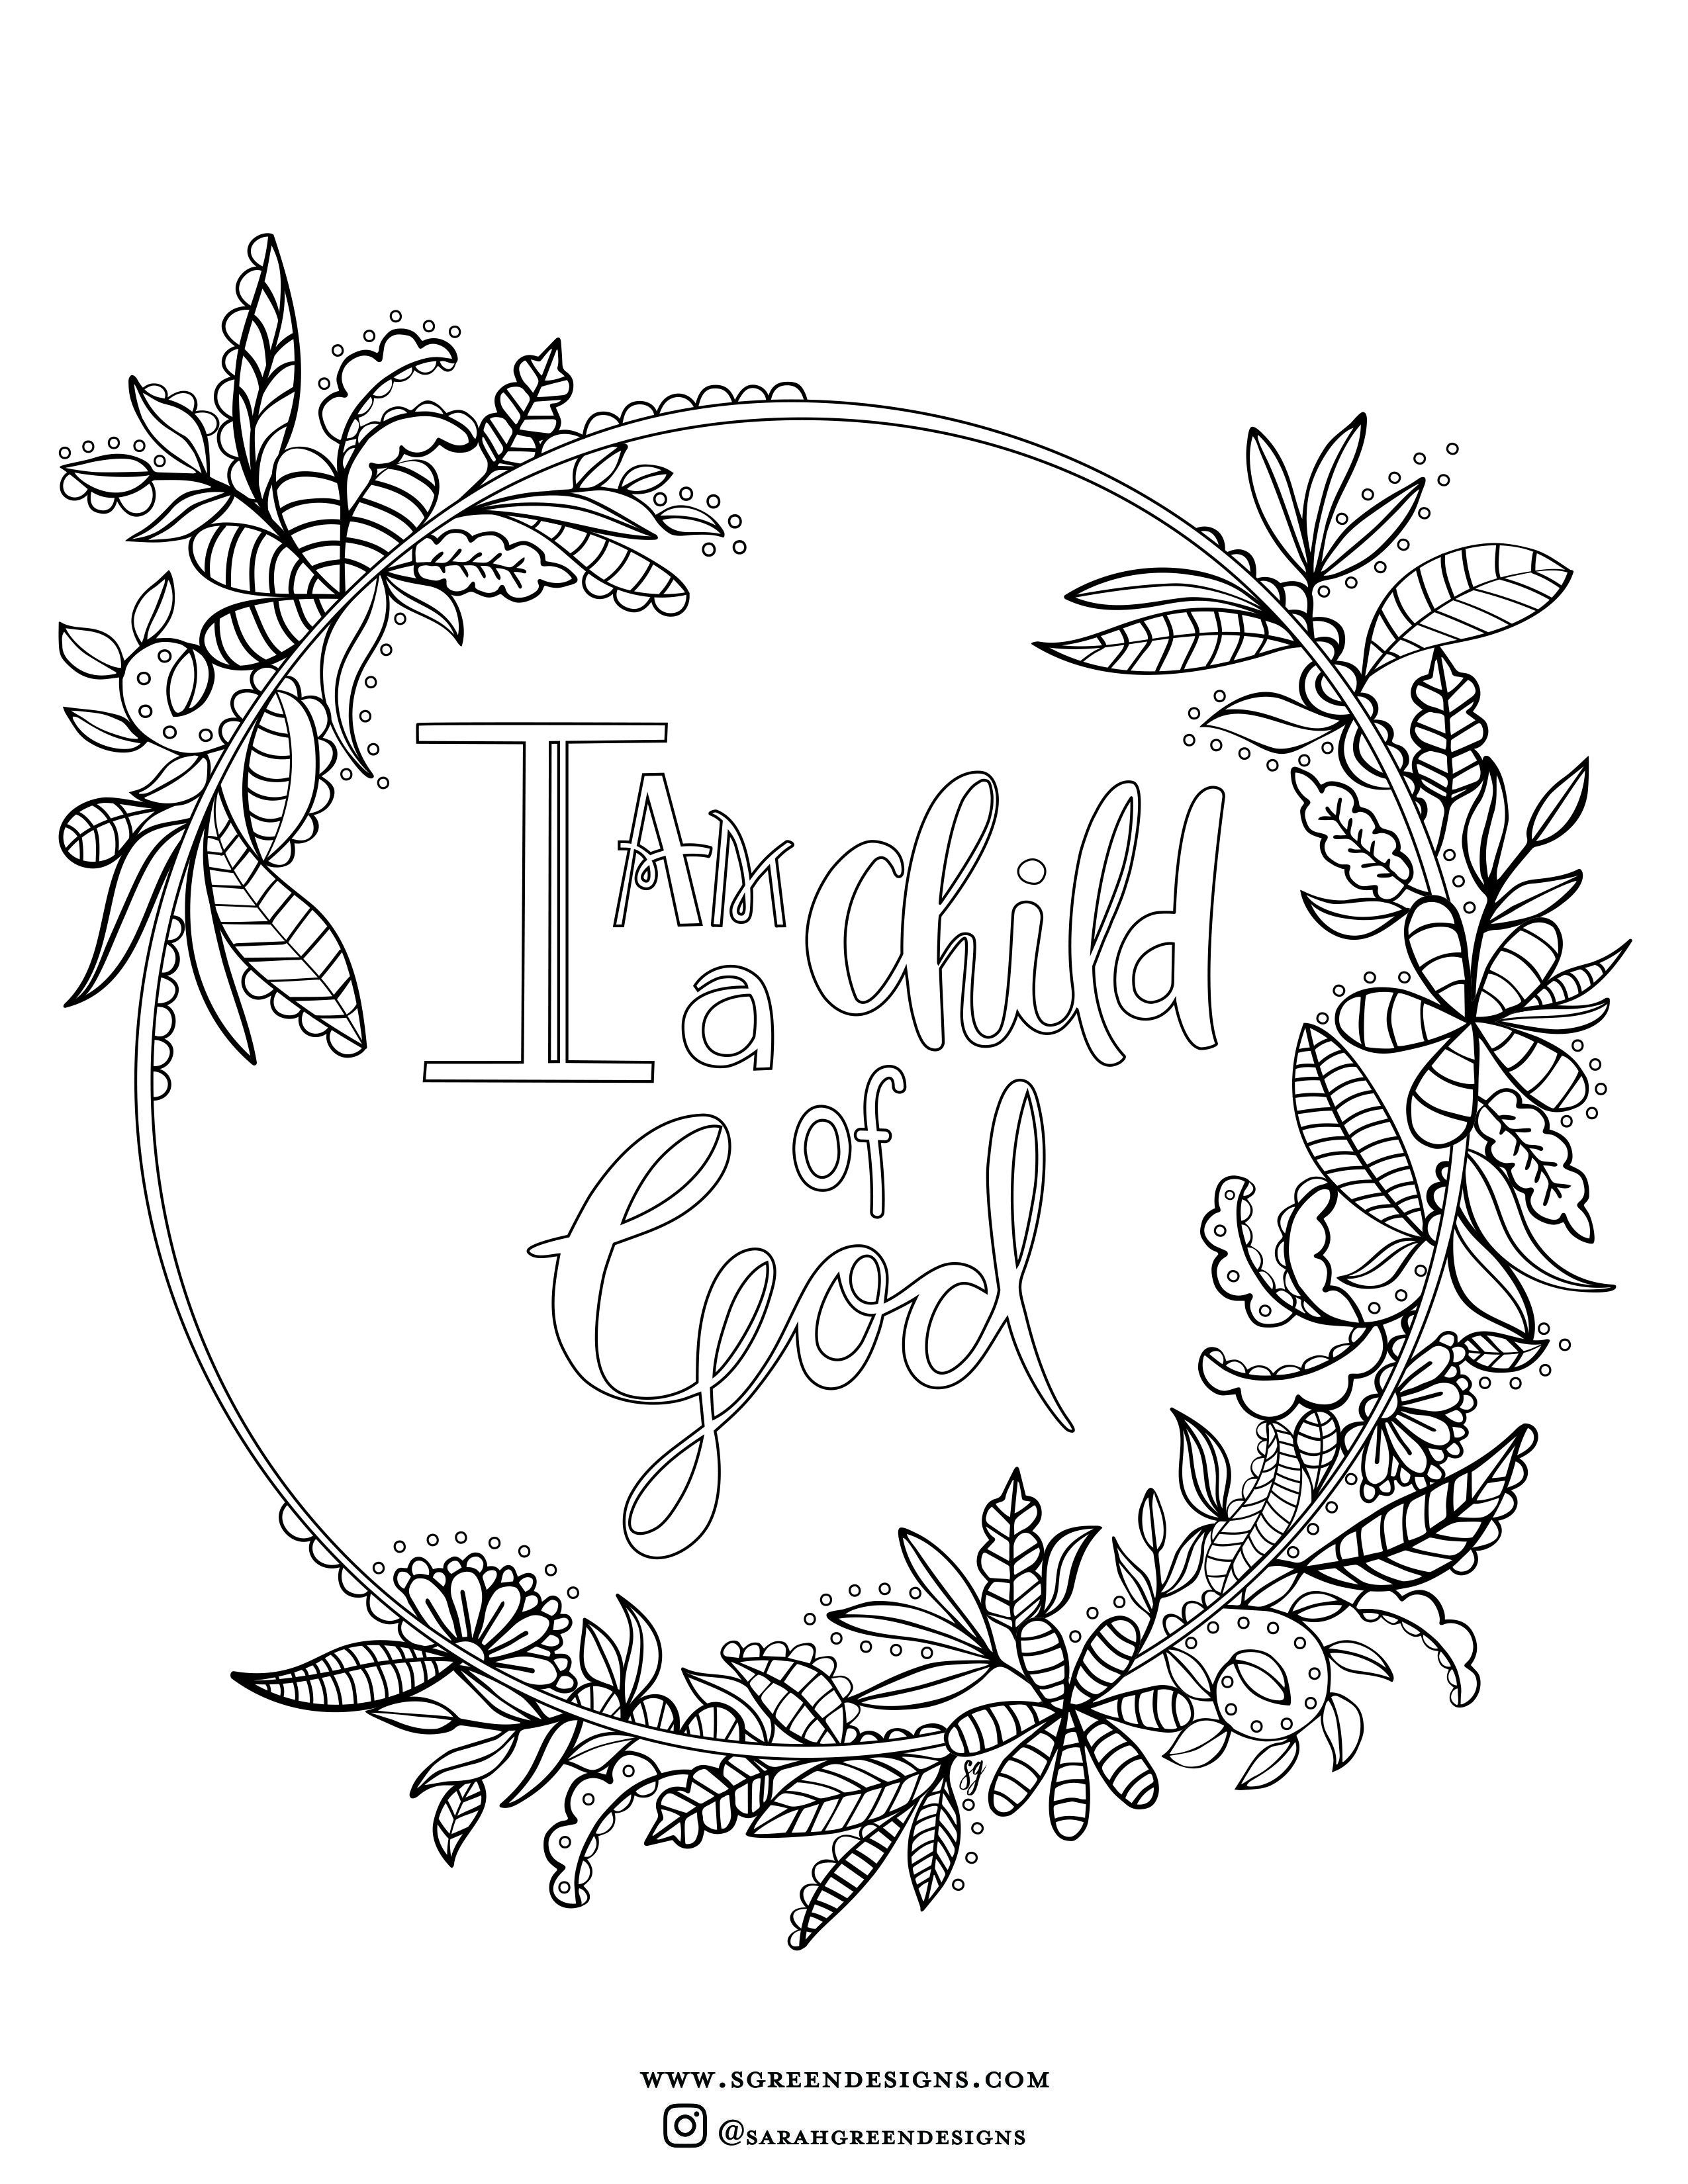 Best photo lds coloring pages popular the beautiful factor concerning color is it is as basic or mayâ christian coloring book free coloring pages coloring pages